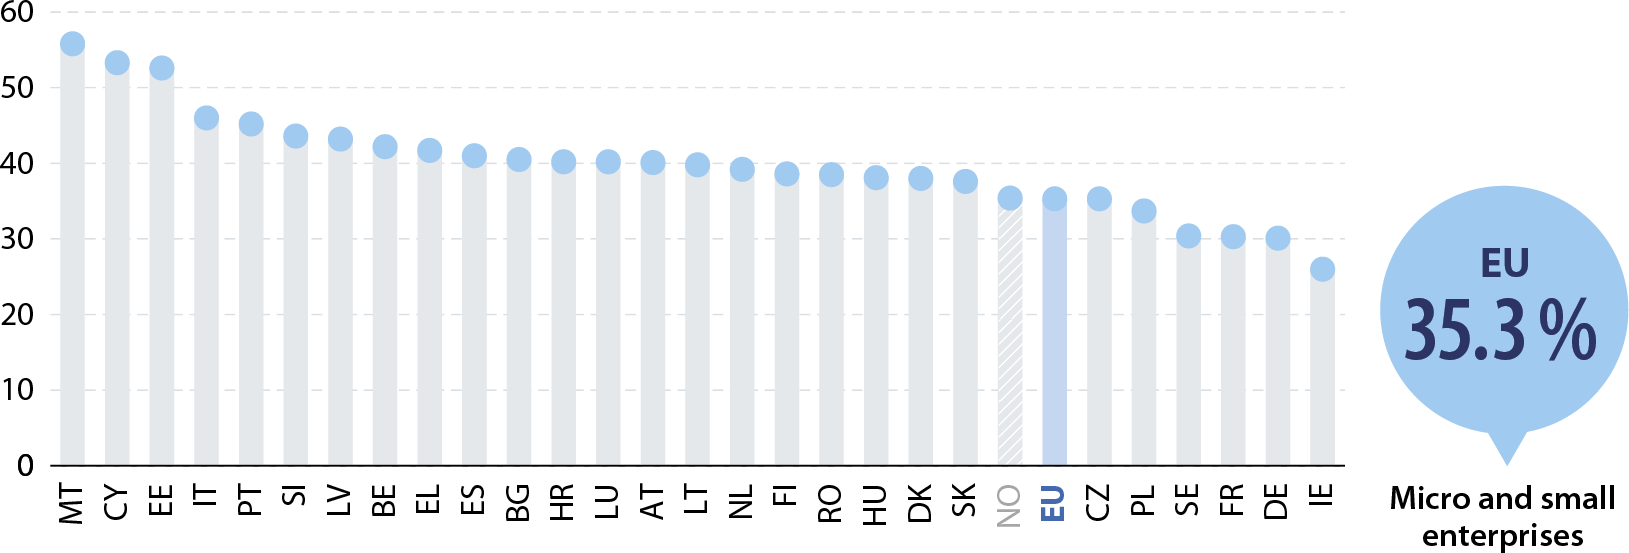 Value added share of each enterprise size class, in percent. Data for the EU and national data for the EU Member States and EFTA countries. Annual data for 2019. Non-financial business economy. Enterprise size classes: micro and small Column charts In 2019, 35% of value added in the EU's non-financial business economy came from micro and small enterprises.